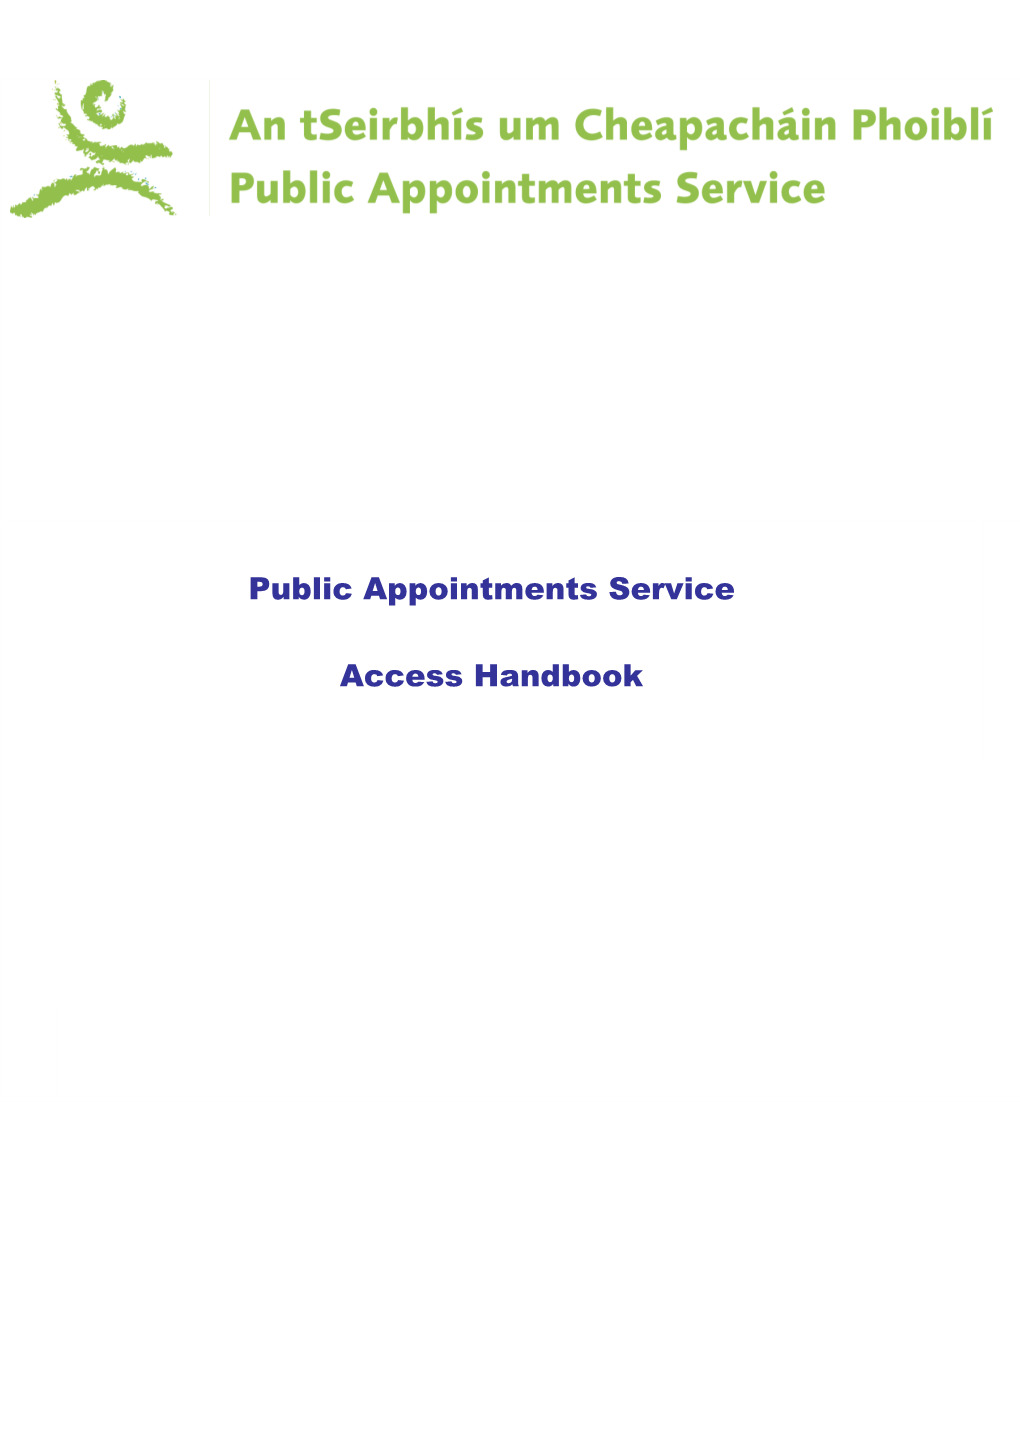 Public Appointments Service Access Handbook